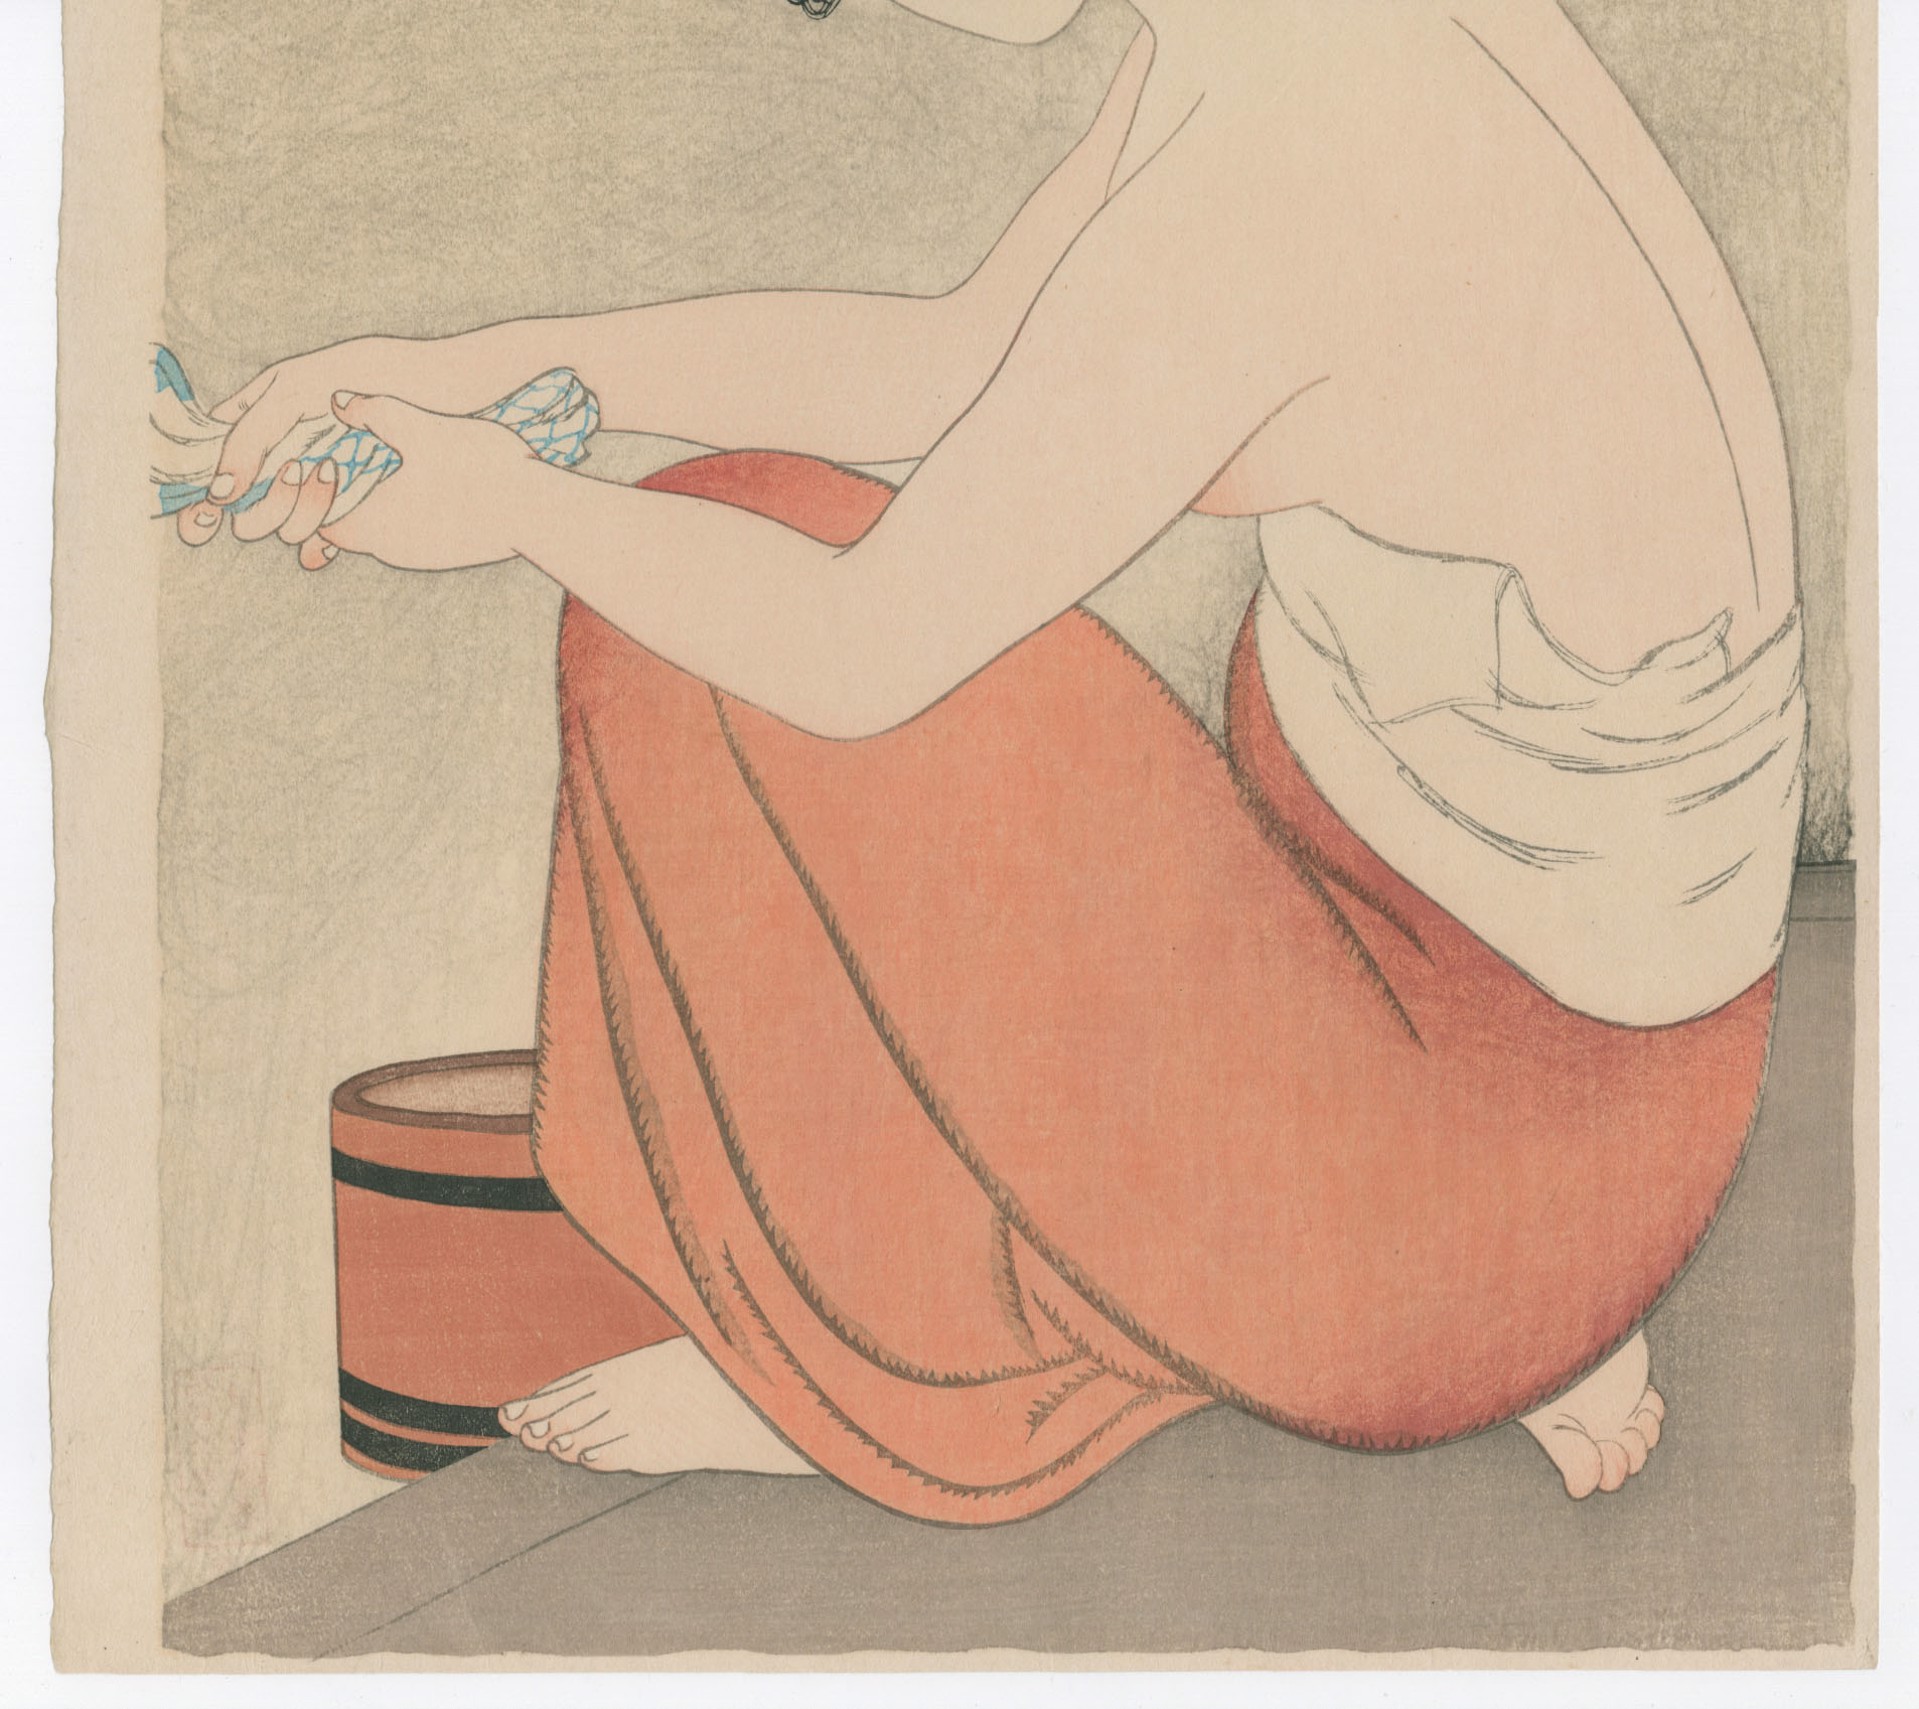 After the Bath  27/50 by Shinsui